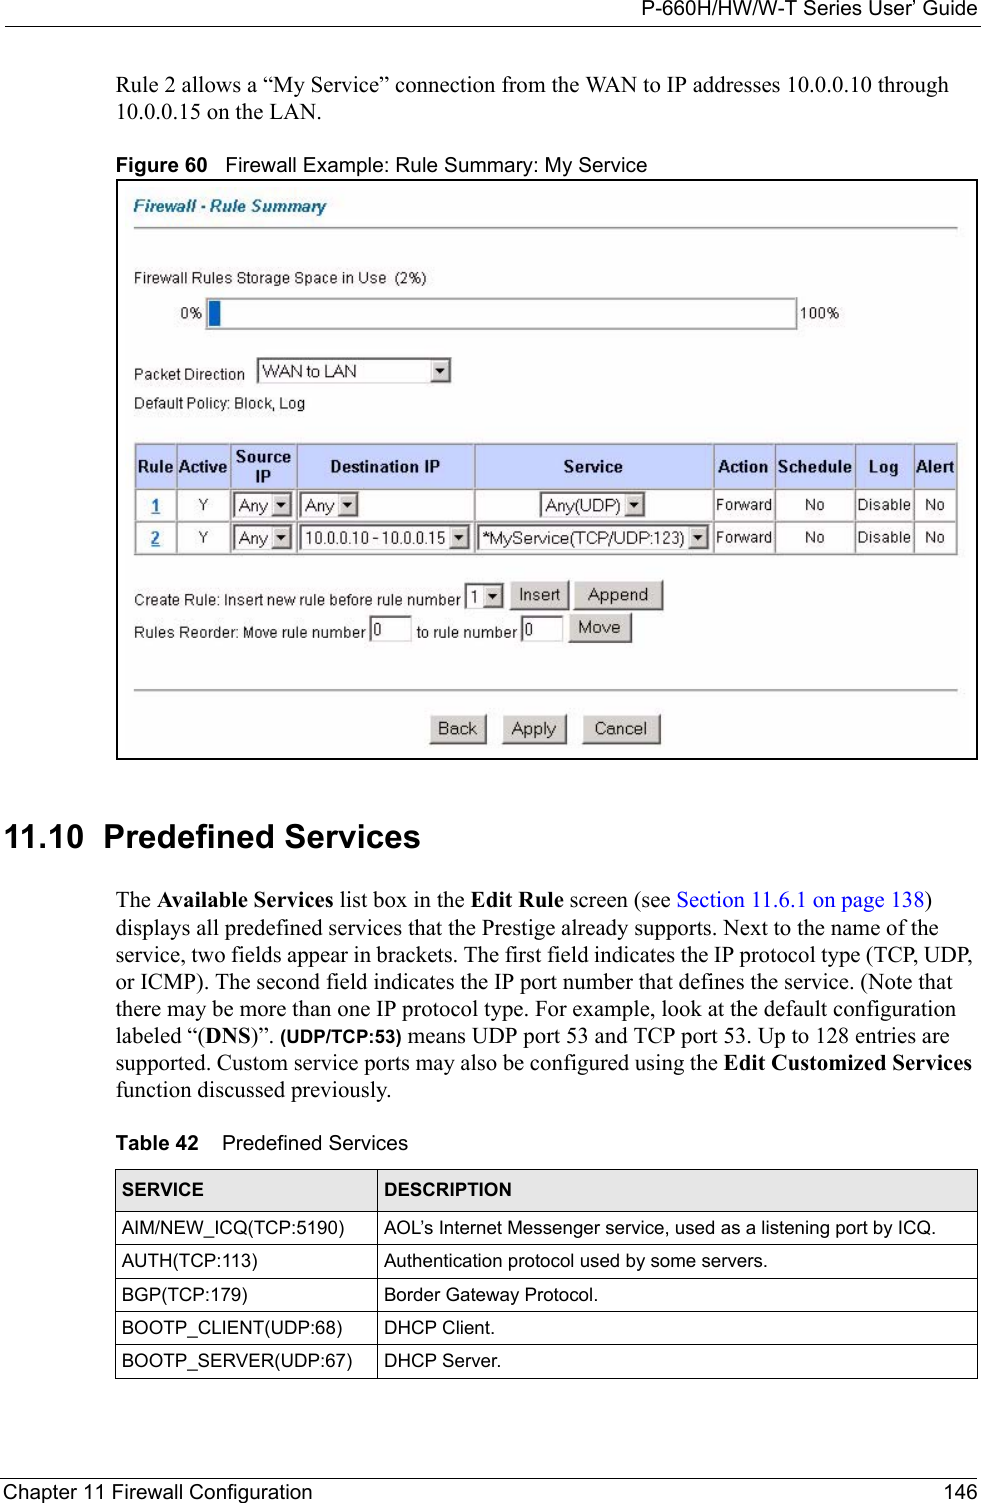 P-660H/HW/W-T Series User’ GuideChapter 11 Firewall Configuration 146Rule 2 allows a “My Service” connection from the WAN to IP addresses 10.0.0.10 through 10.0.0.15 on the LAN.Figure 60   Firewall Example: Rule Summary: My Service 11.10  Predefined ServicesThe Available Services list box in the Edit Rule screen (see Section 11.6.1 on page 138) displays all predefined services that the Prestige already supports. Next to the name of the service, two fields appear in brackets. The first field indicates the IP protocol type (TCP, UDP, or ICMP). The second field indicates the IP port number that defines the service. (Note that there may be more than one IP protocol type. For example, look at the default configuration labeled “(DNS)”. (UDP/TCP:53) means UDP port 53 and TCP port 53. Up to 128 entries are supported. Custom service ports may also be configured using the Edit Customized Services function discussed previously.Table 42    Predefined ServicesSERVICE DESCRIPTIONAIM/NEW_ICQ(TCP:5190) AOL’s Internet Messenger service, used as a listening port by ICQ.AUTH(TCP:113) Authentication protocol used by some servers.BGP(TCP:179)  Border Gateway Protocol.BOOTP_CLIENT(UDP:68)  DHCP Client.BOOTP_SERVER(UDP:67)  DHCP Server.